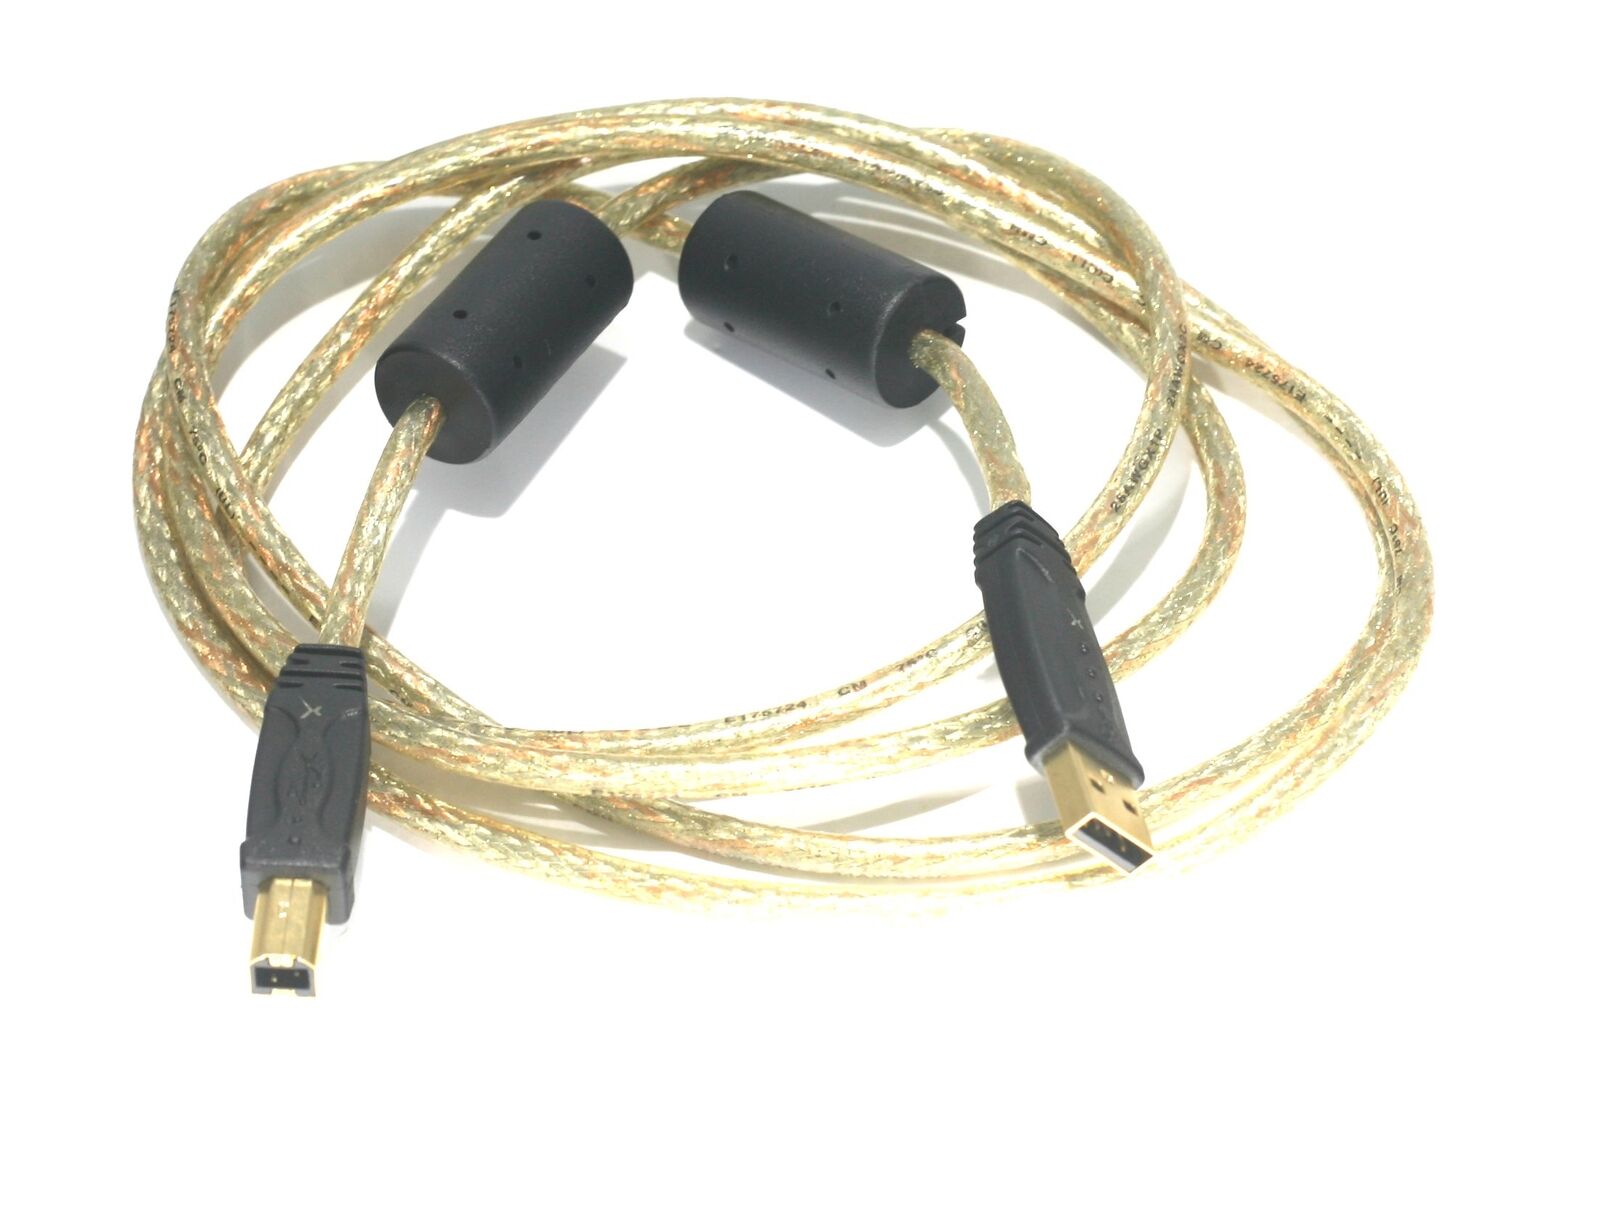 USB 2.0 Cable A-B 6FT Premium USB Cable Gold Dual Ferrite